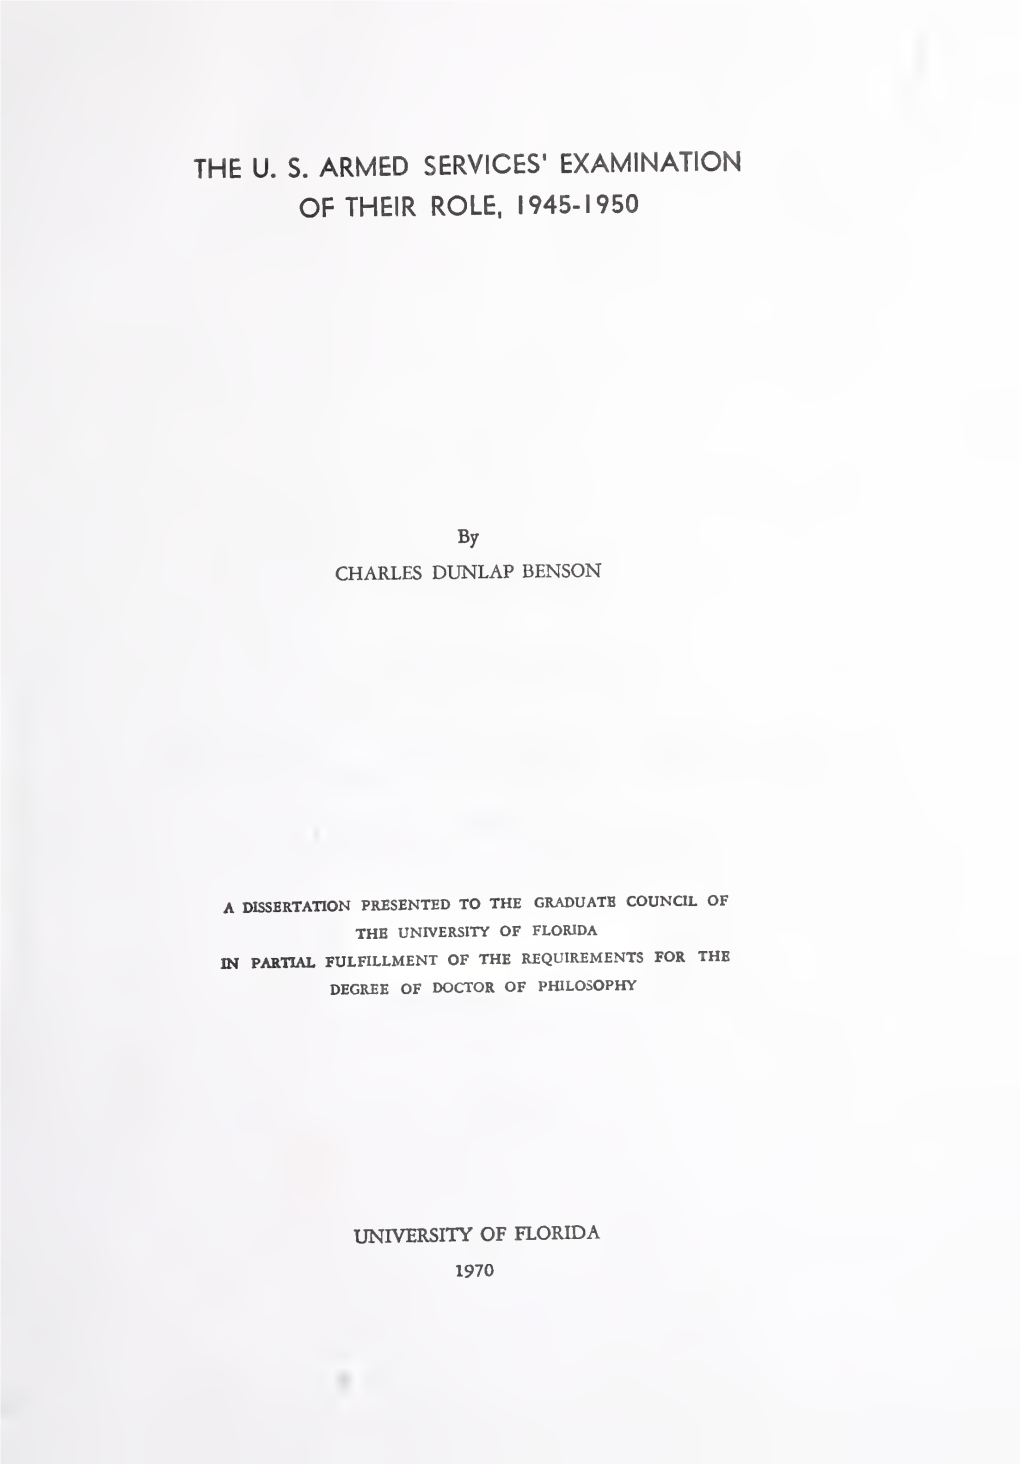 The U.S. Armed Services' Examination of Their Role, 1945-1950